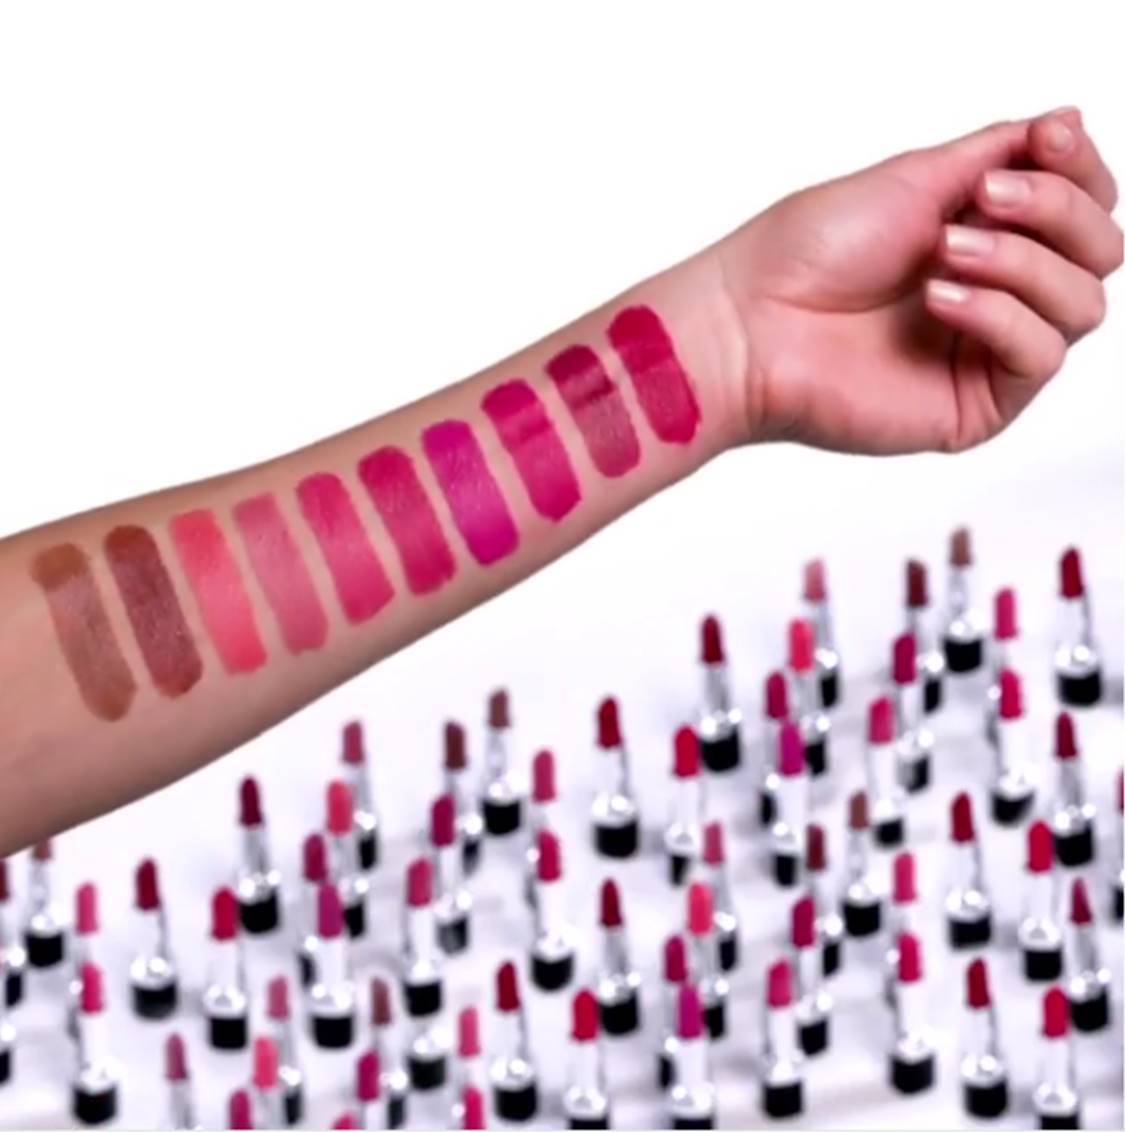 Erica S Fashion And Beauty Avon True Color Nourishing Lipstick Swatches